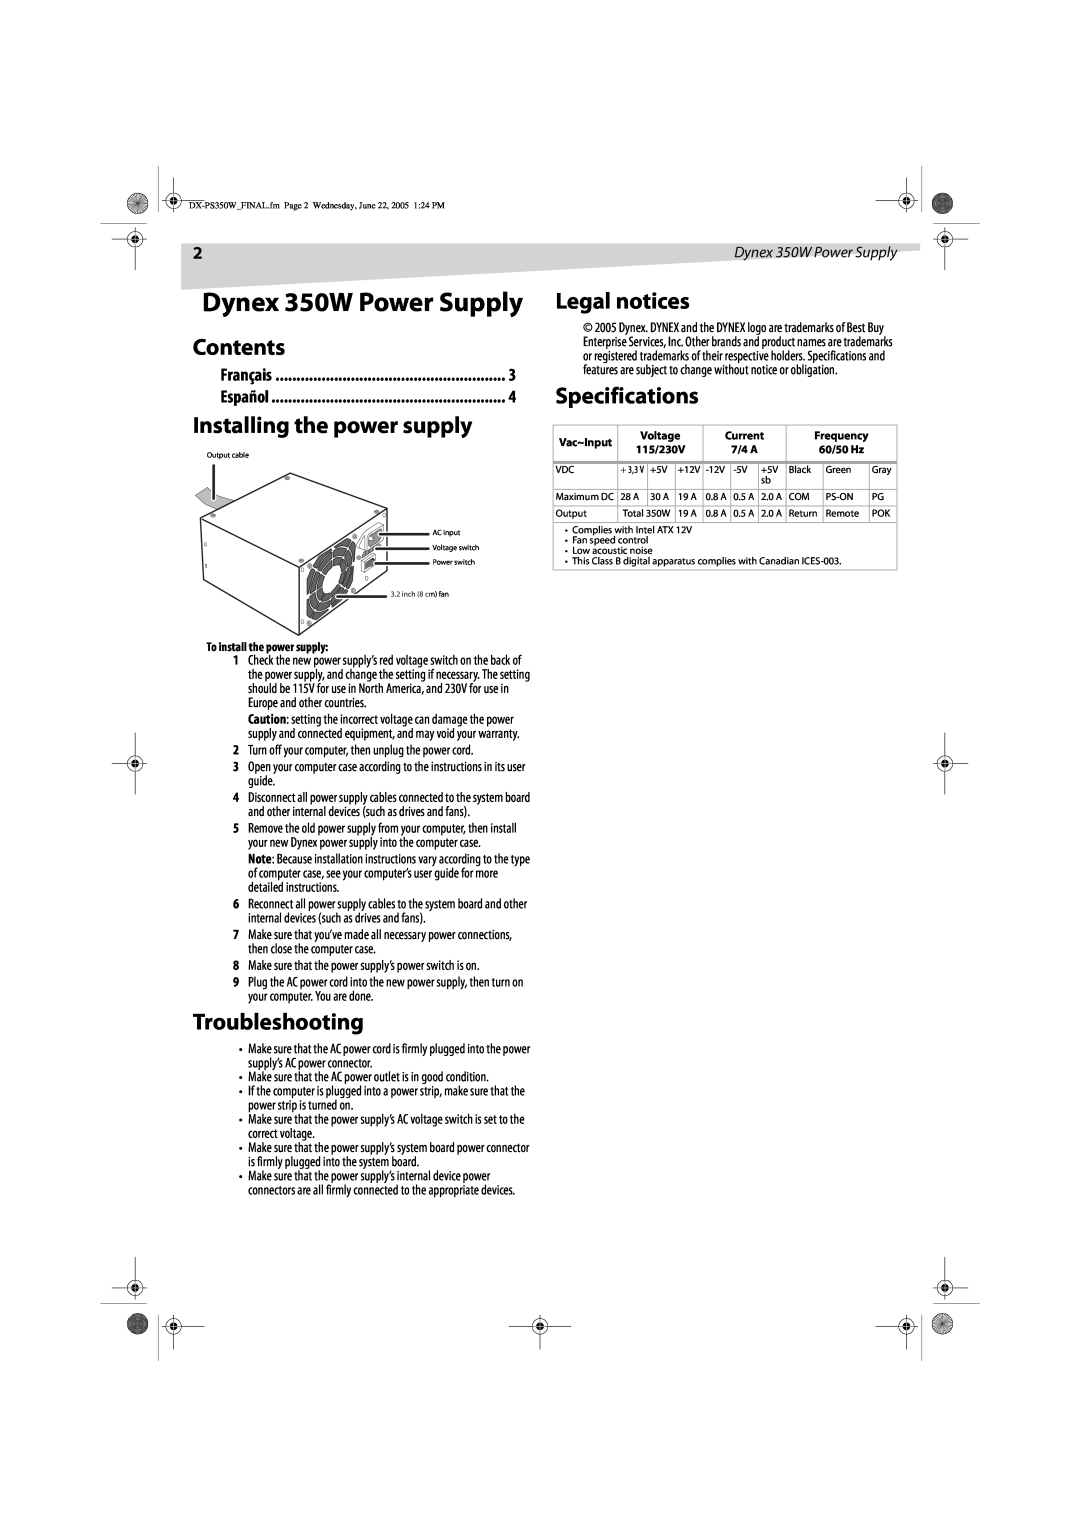 Dynex DX-PS350W Dynex 350W Power Supply, Contents, Installing the power supply, Legal notices, Specifications, Français 